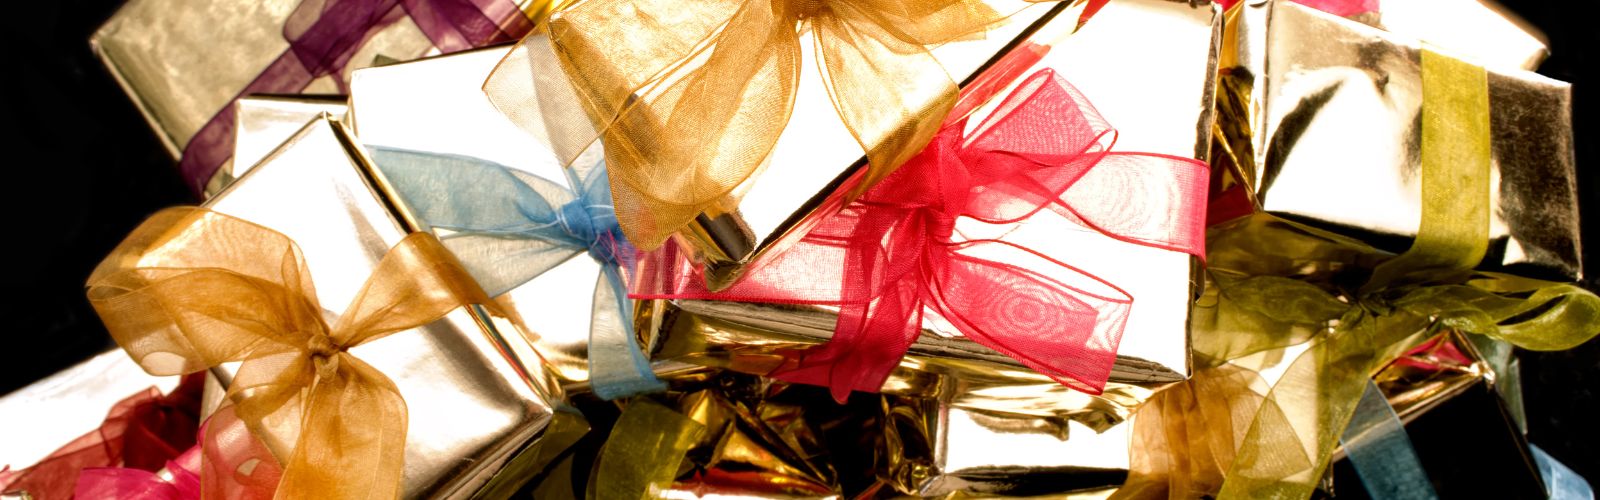 Gifts wrapped in gold paper with different colored ribbons